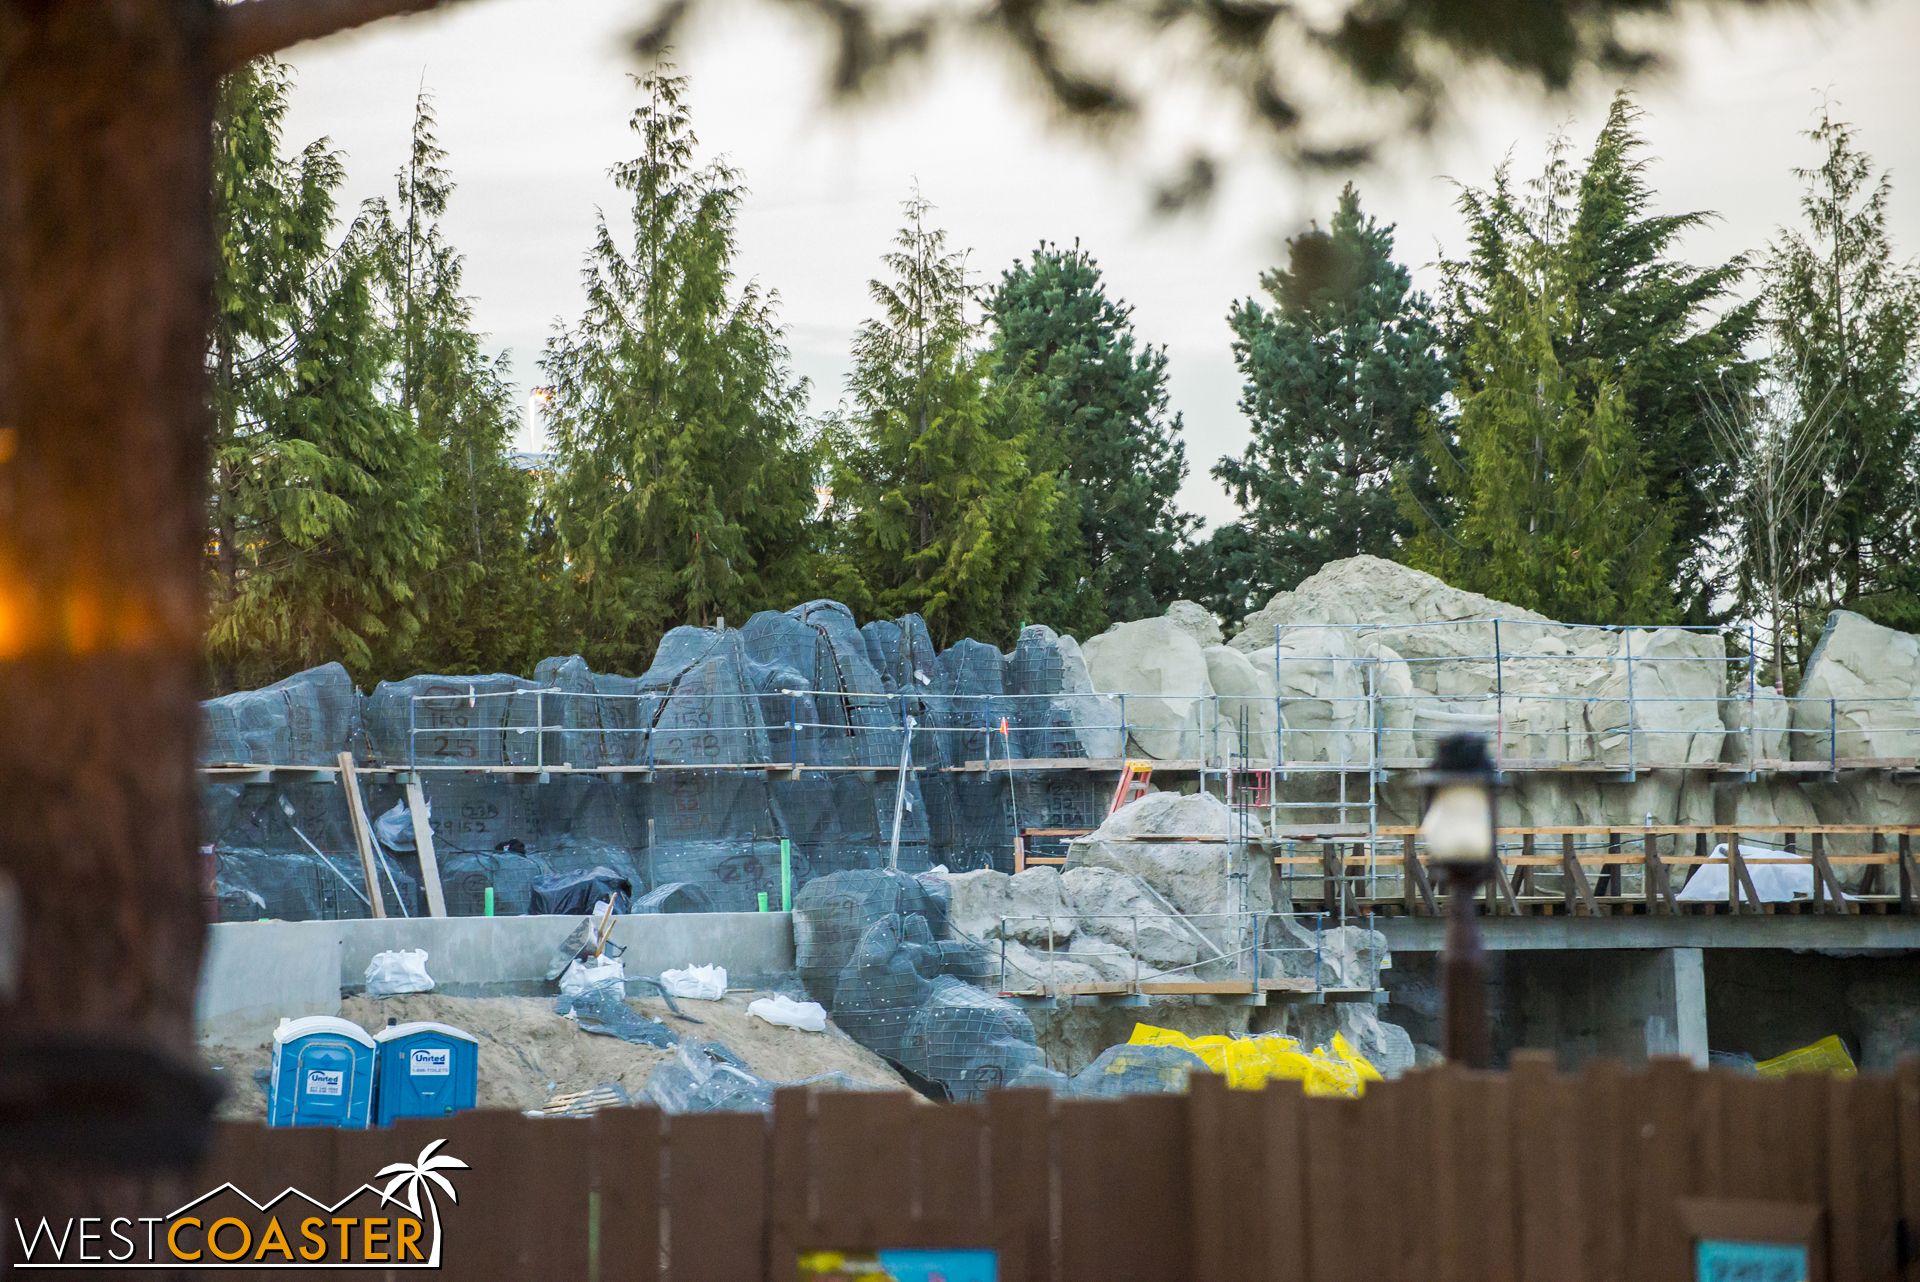  A glimpse over the work walls by Critter Country shows more progress on the rockwork. 